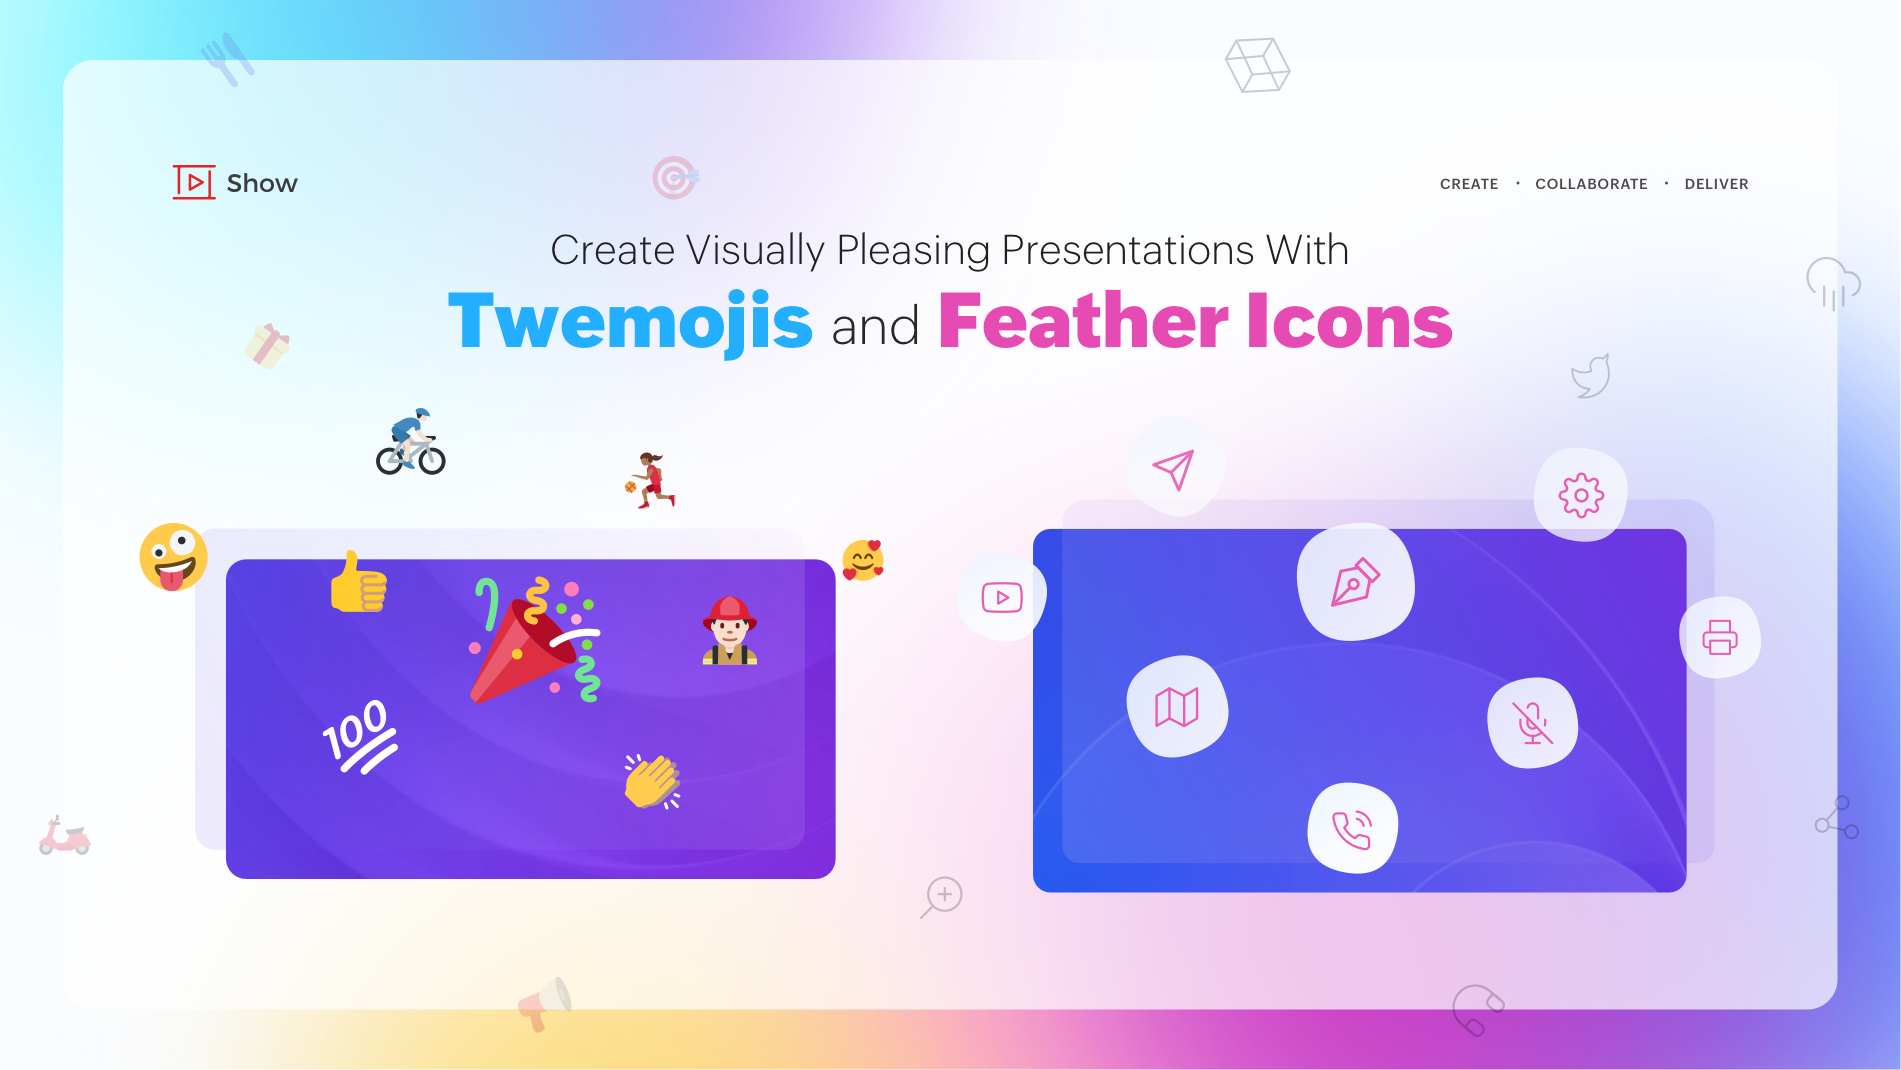 Create visually pleasing presentations with Twemojis and Feather Icons